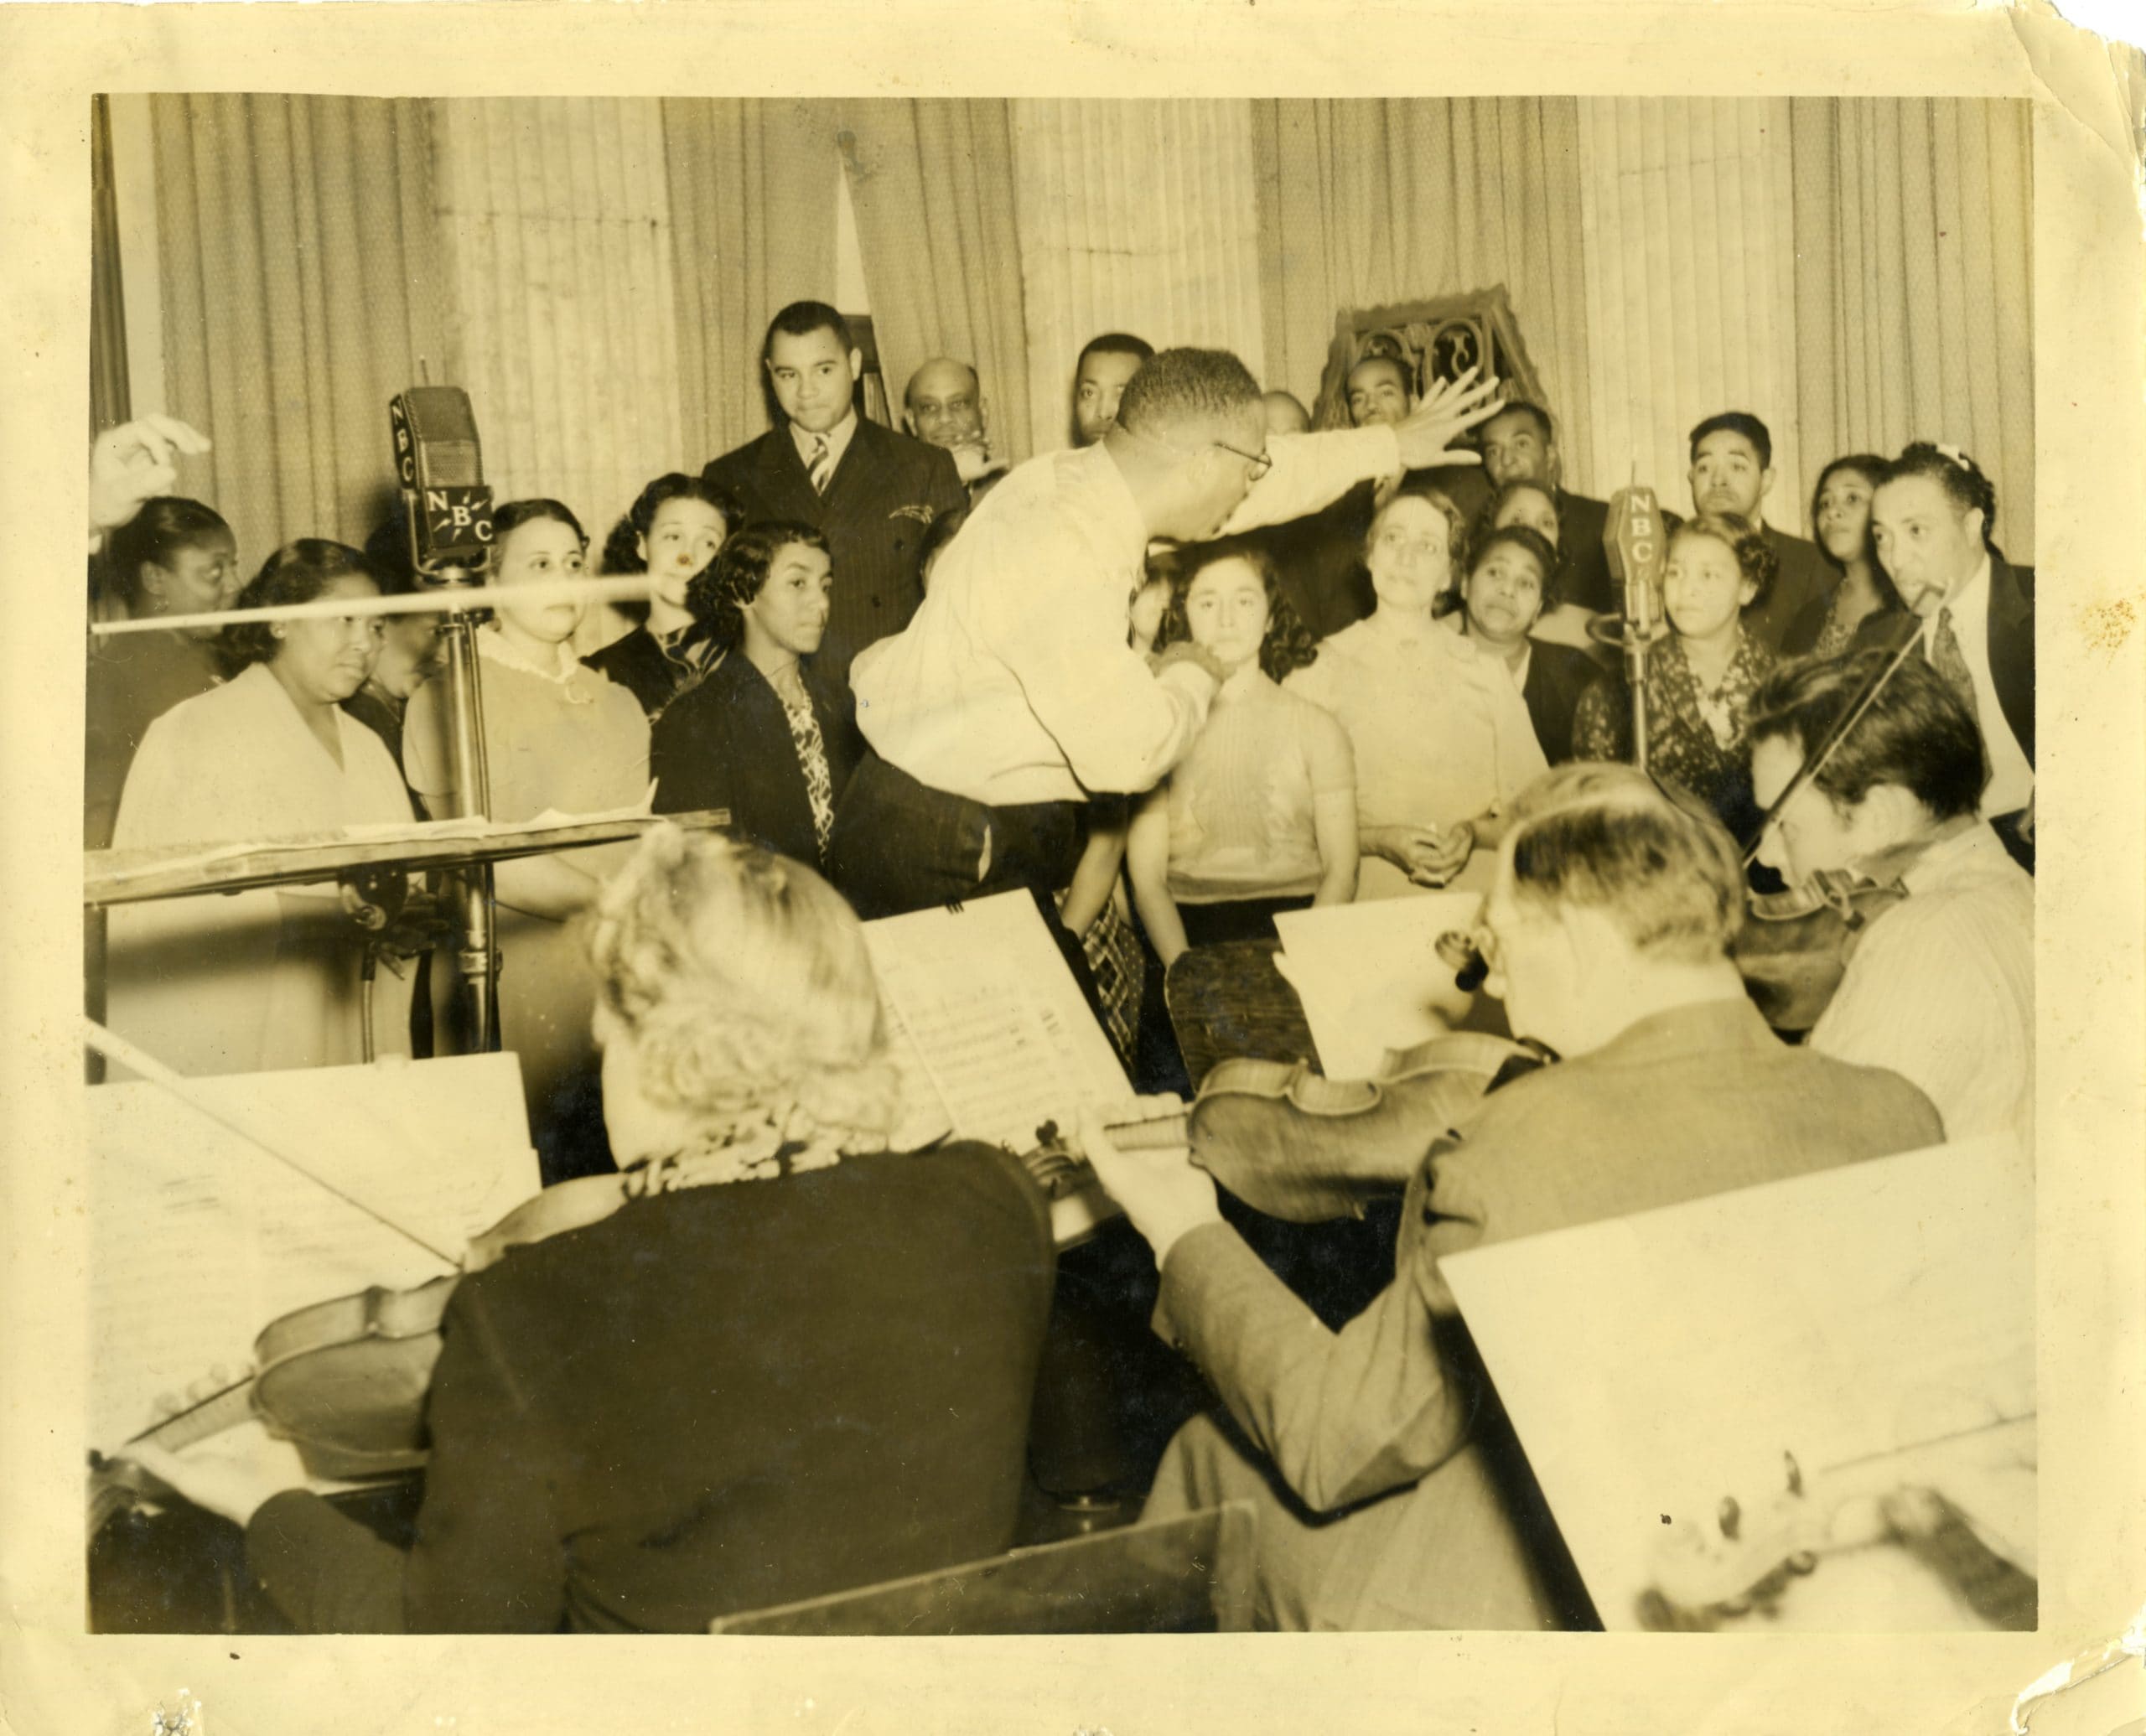 Elmer Keeton directing choir in front of NBC microphones